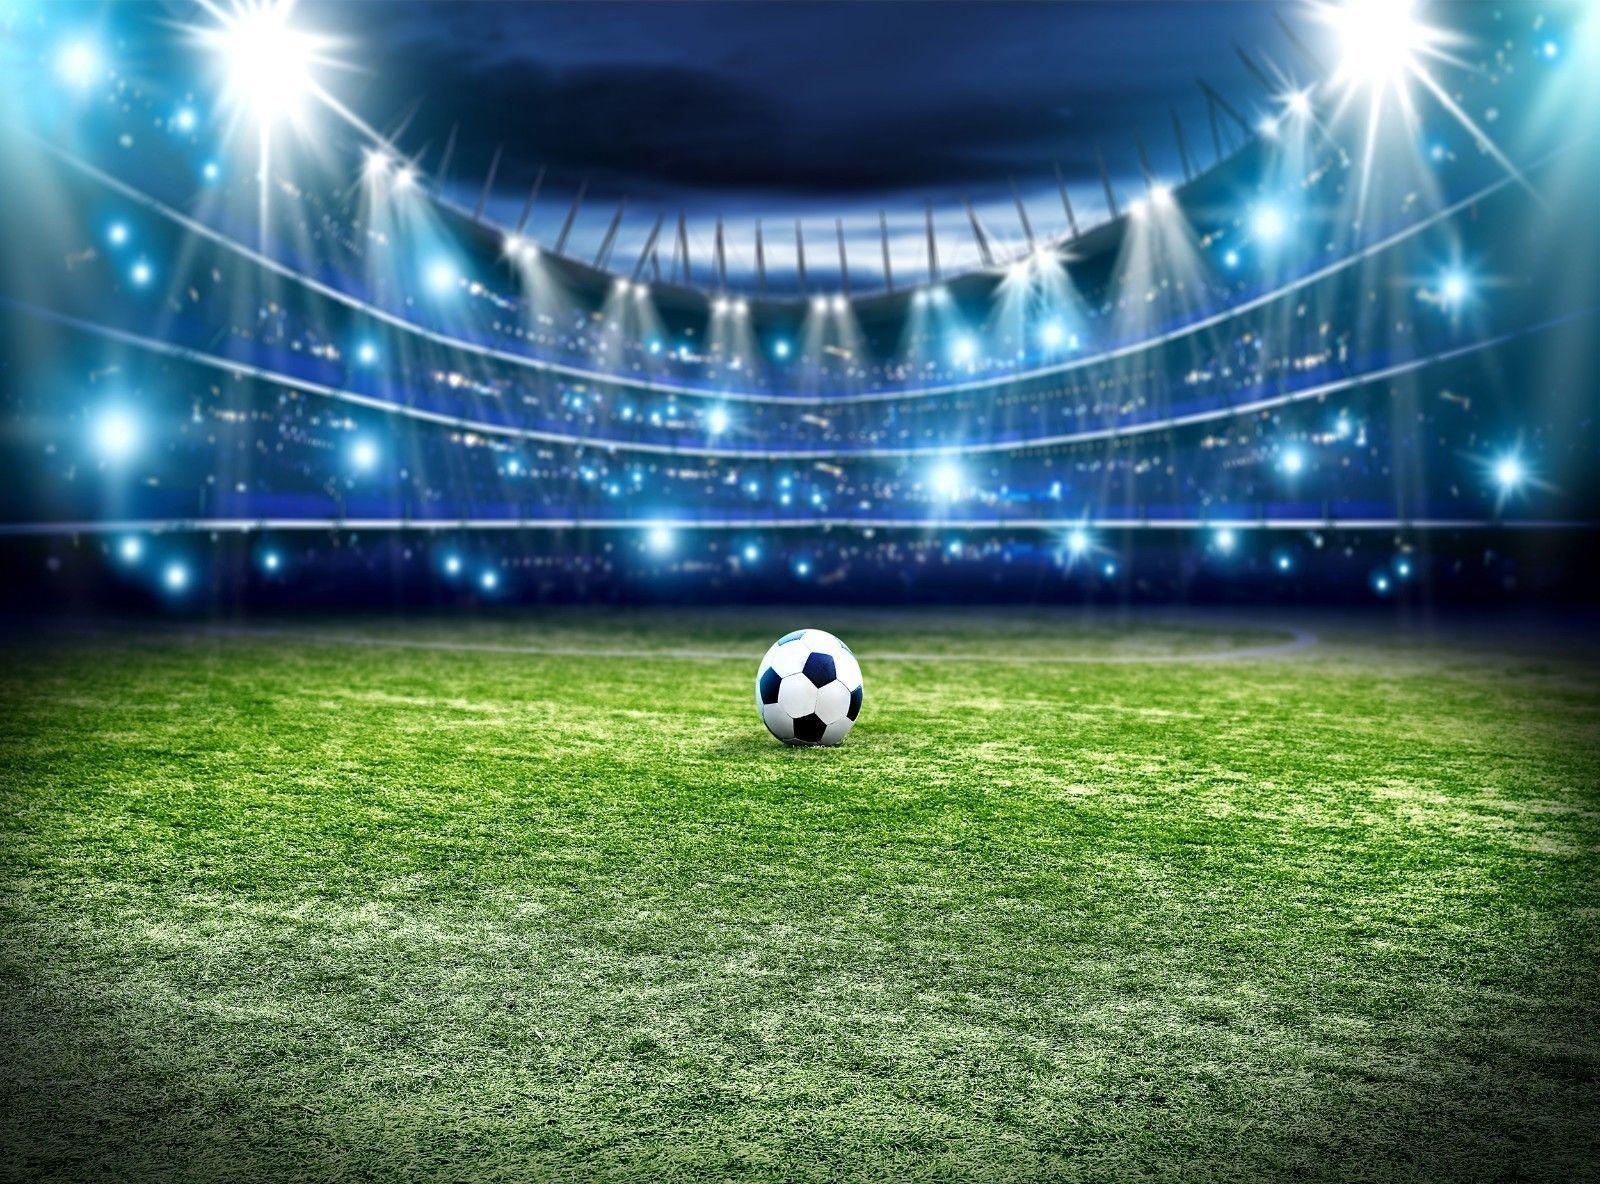 Football Pitch Wallpapers Top Free Football Pitch Backgrounds Wallpaperaccess 